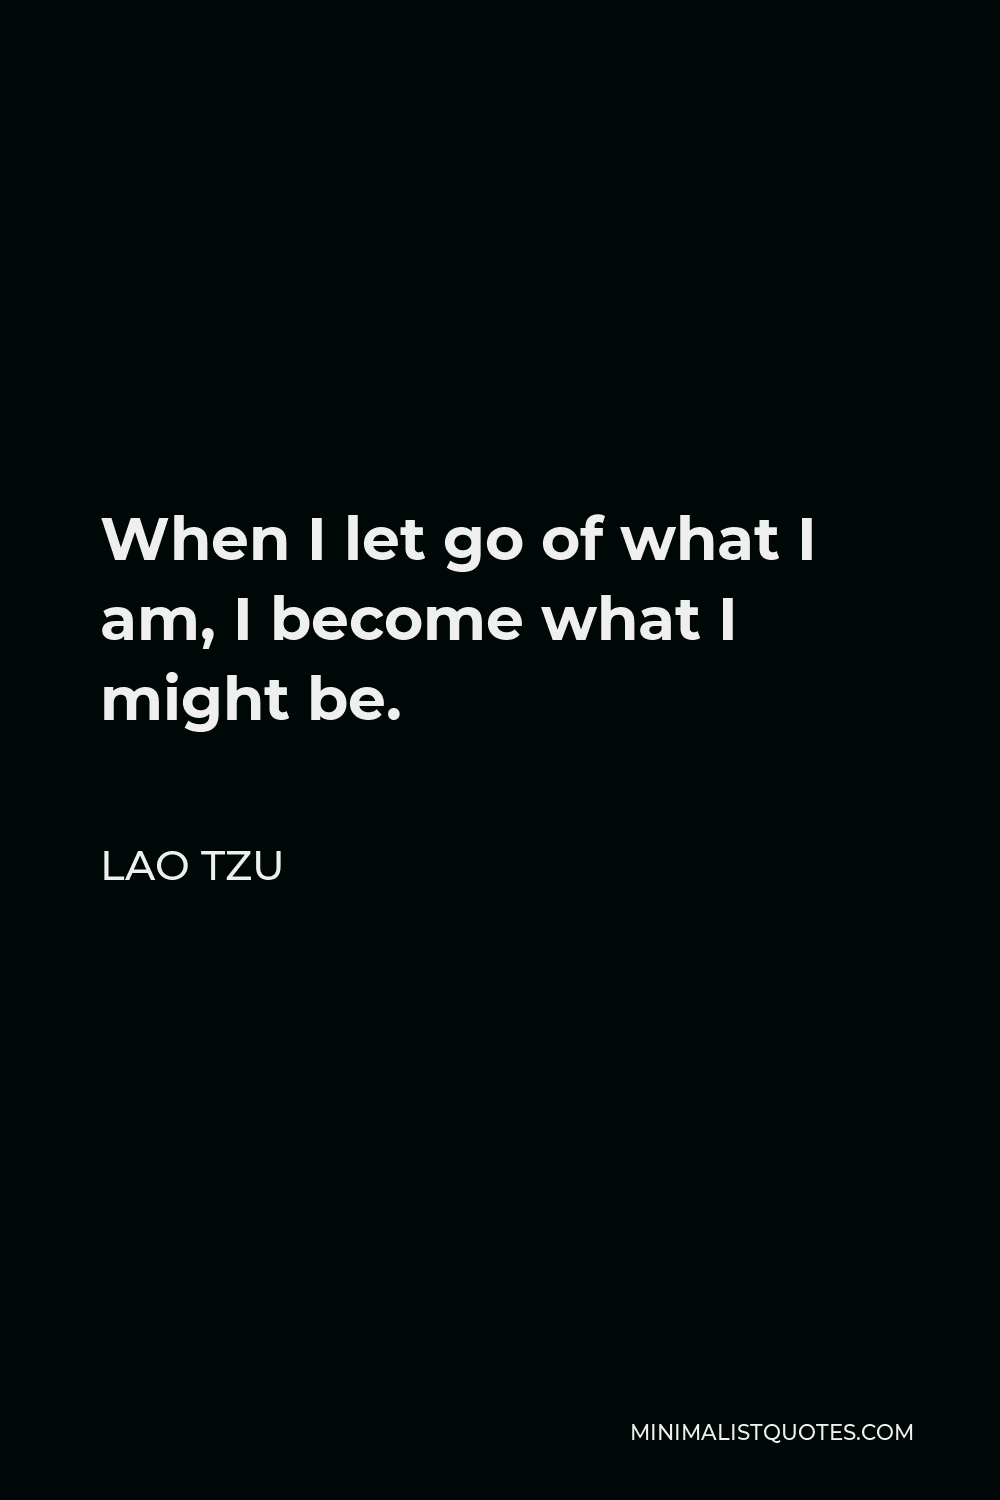 Lao Tzu Quote - When I let go of what I am, I become what I might be.